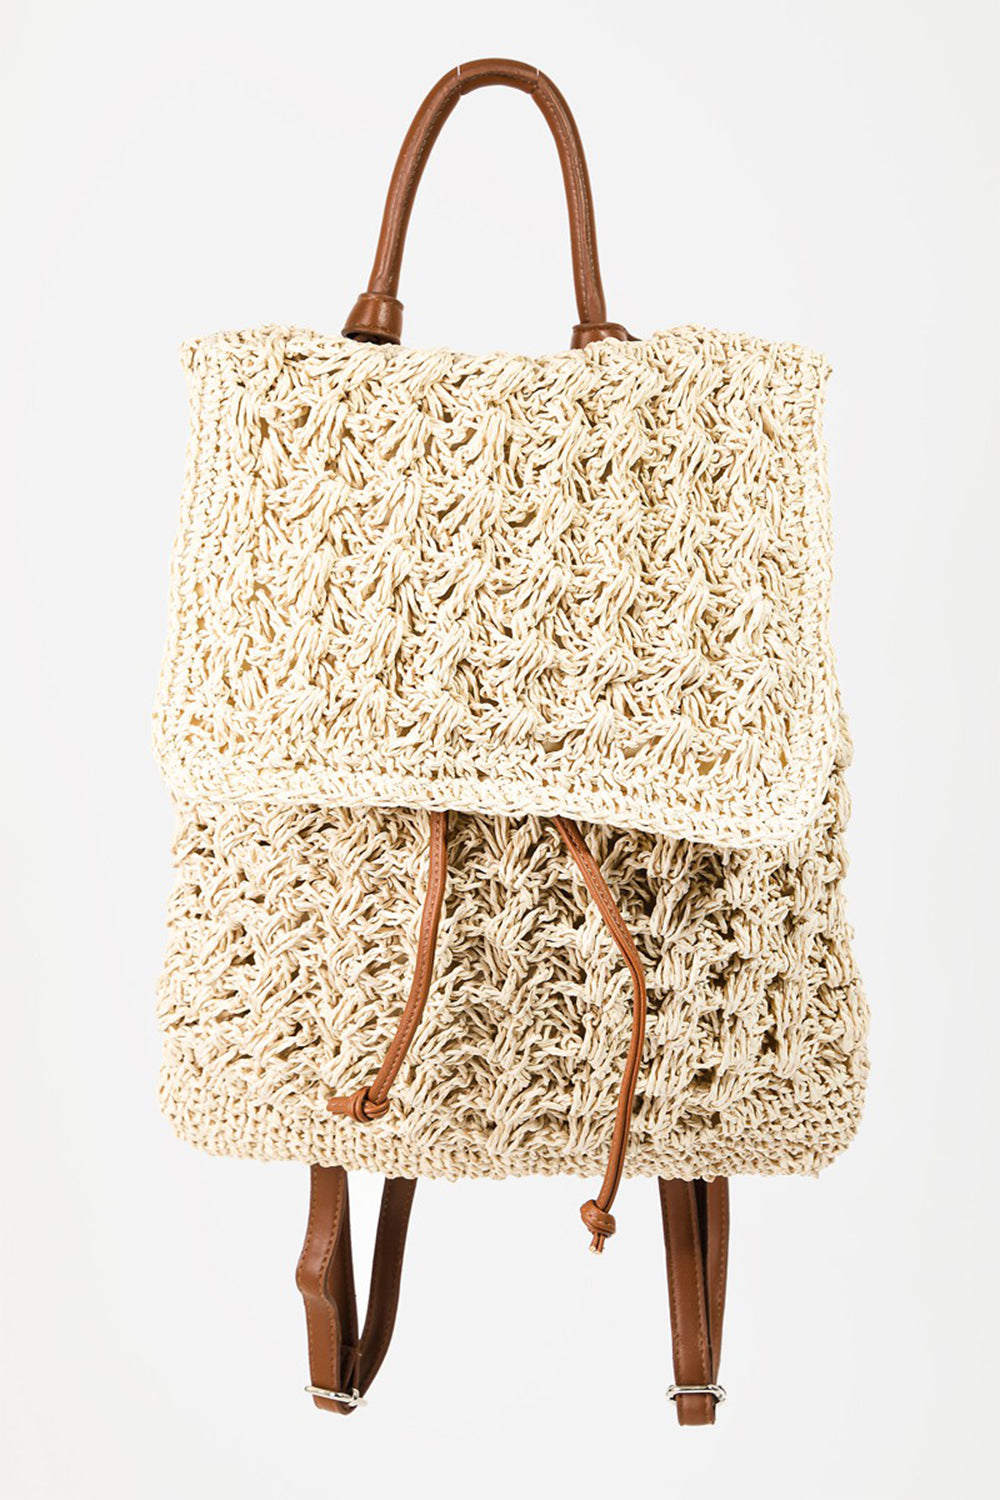 Same straw, braided, faux, leather strap, backpack bag-Wild Willows Boutique NY – Massapequa, New York. Affordable and fashionable clothing for women of all ages. Bottoms, tops, dresses, intimates, outerwear, sweaters, shoes, accessories, jewelry, activewear and more//wild Willow Boutique 